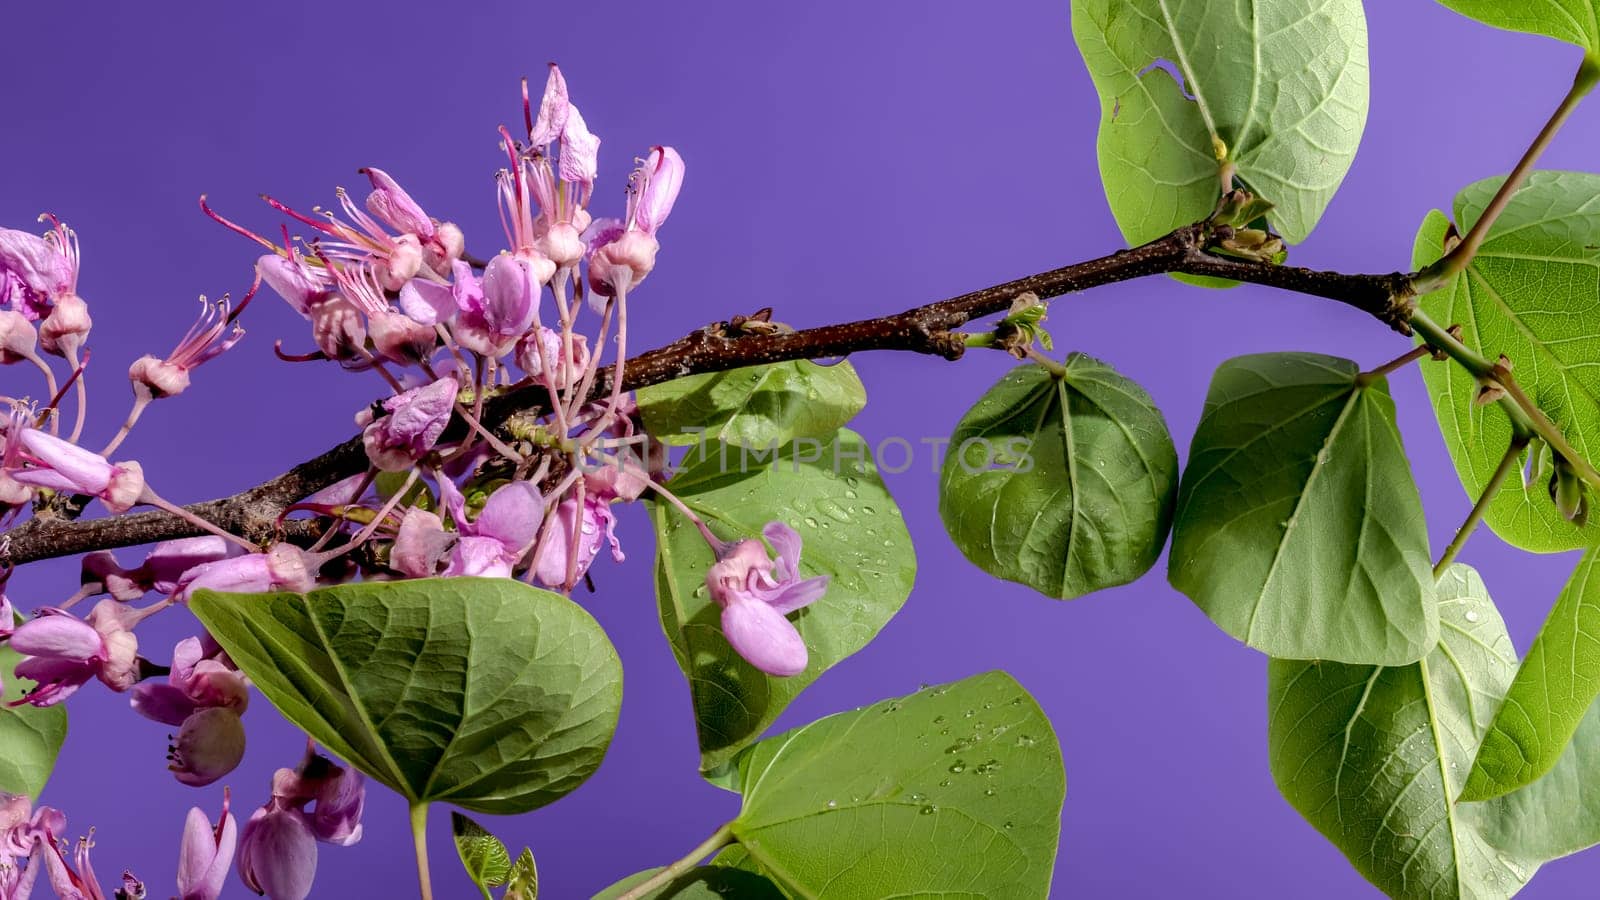 Blooming cercis siliquastrum on a purple background by Multipedia